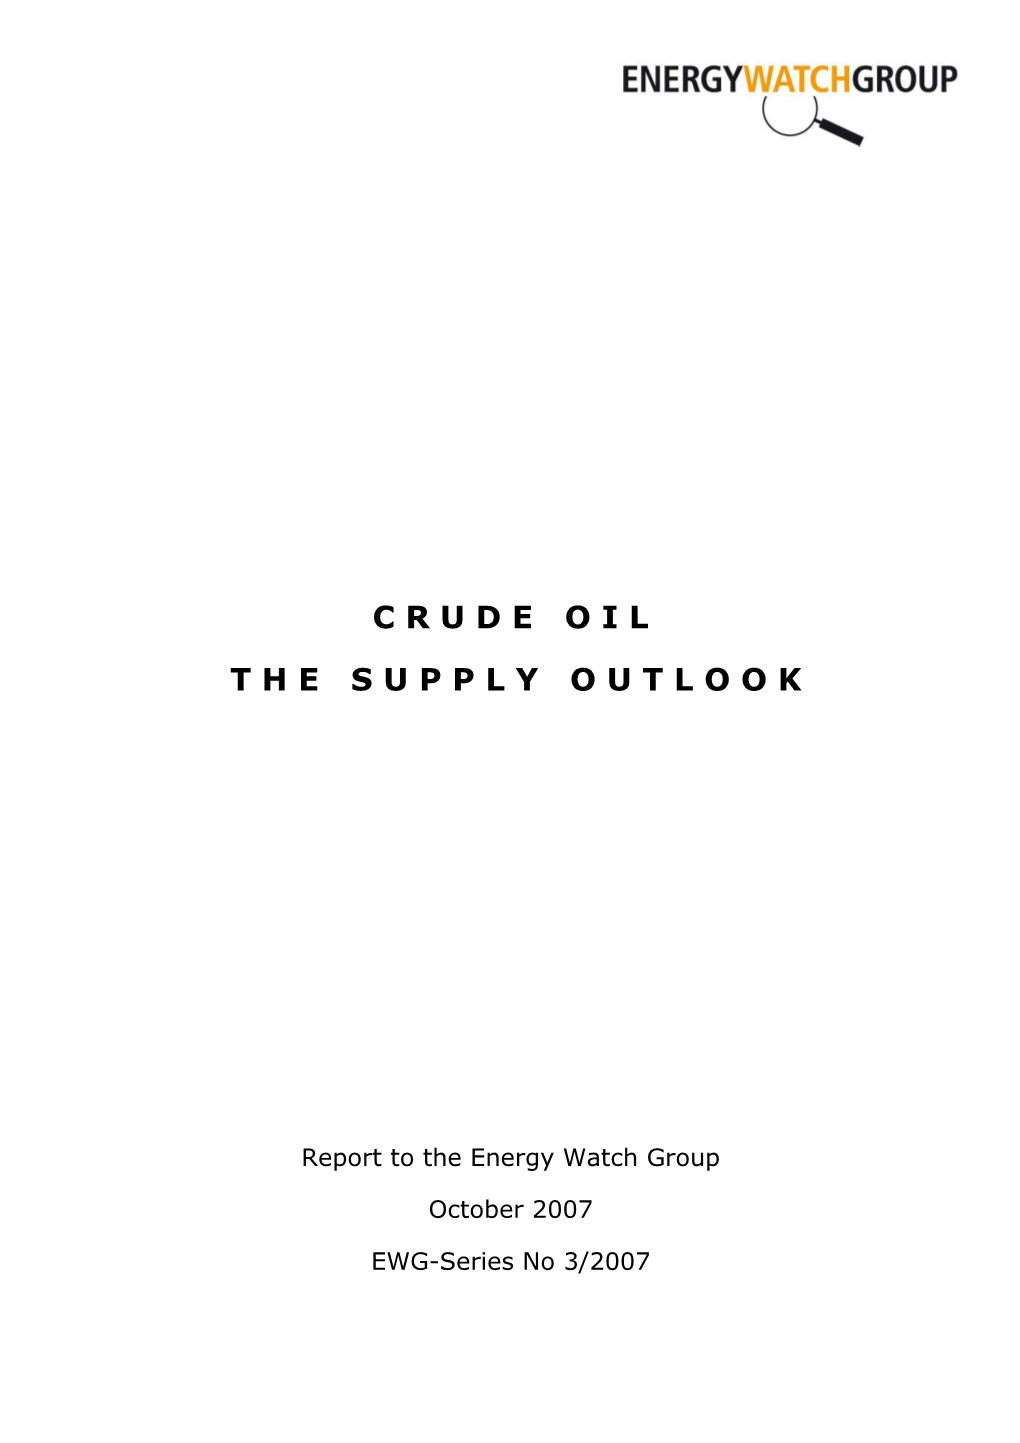 Crude Oil: the Supply Outlook